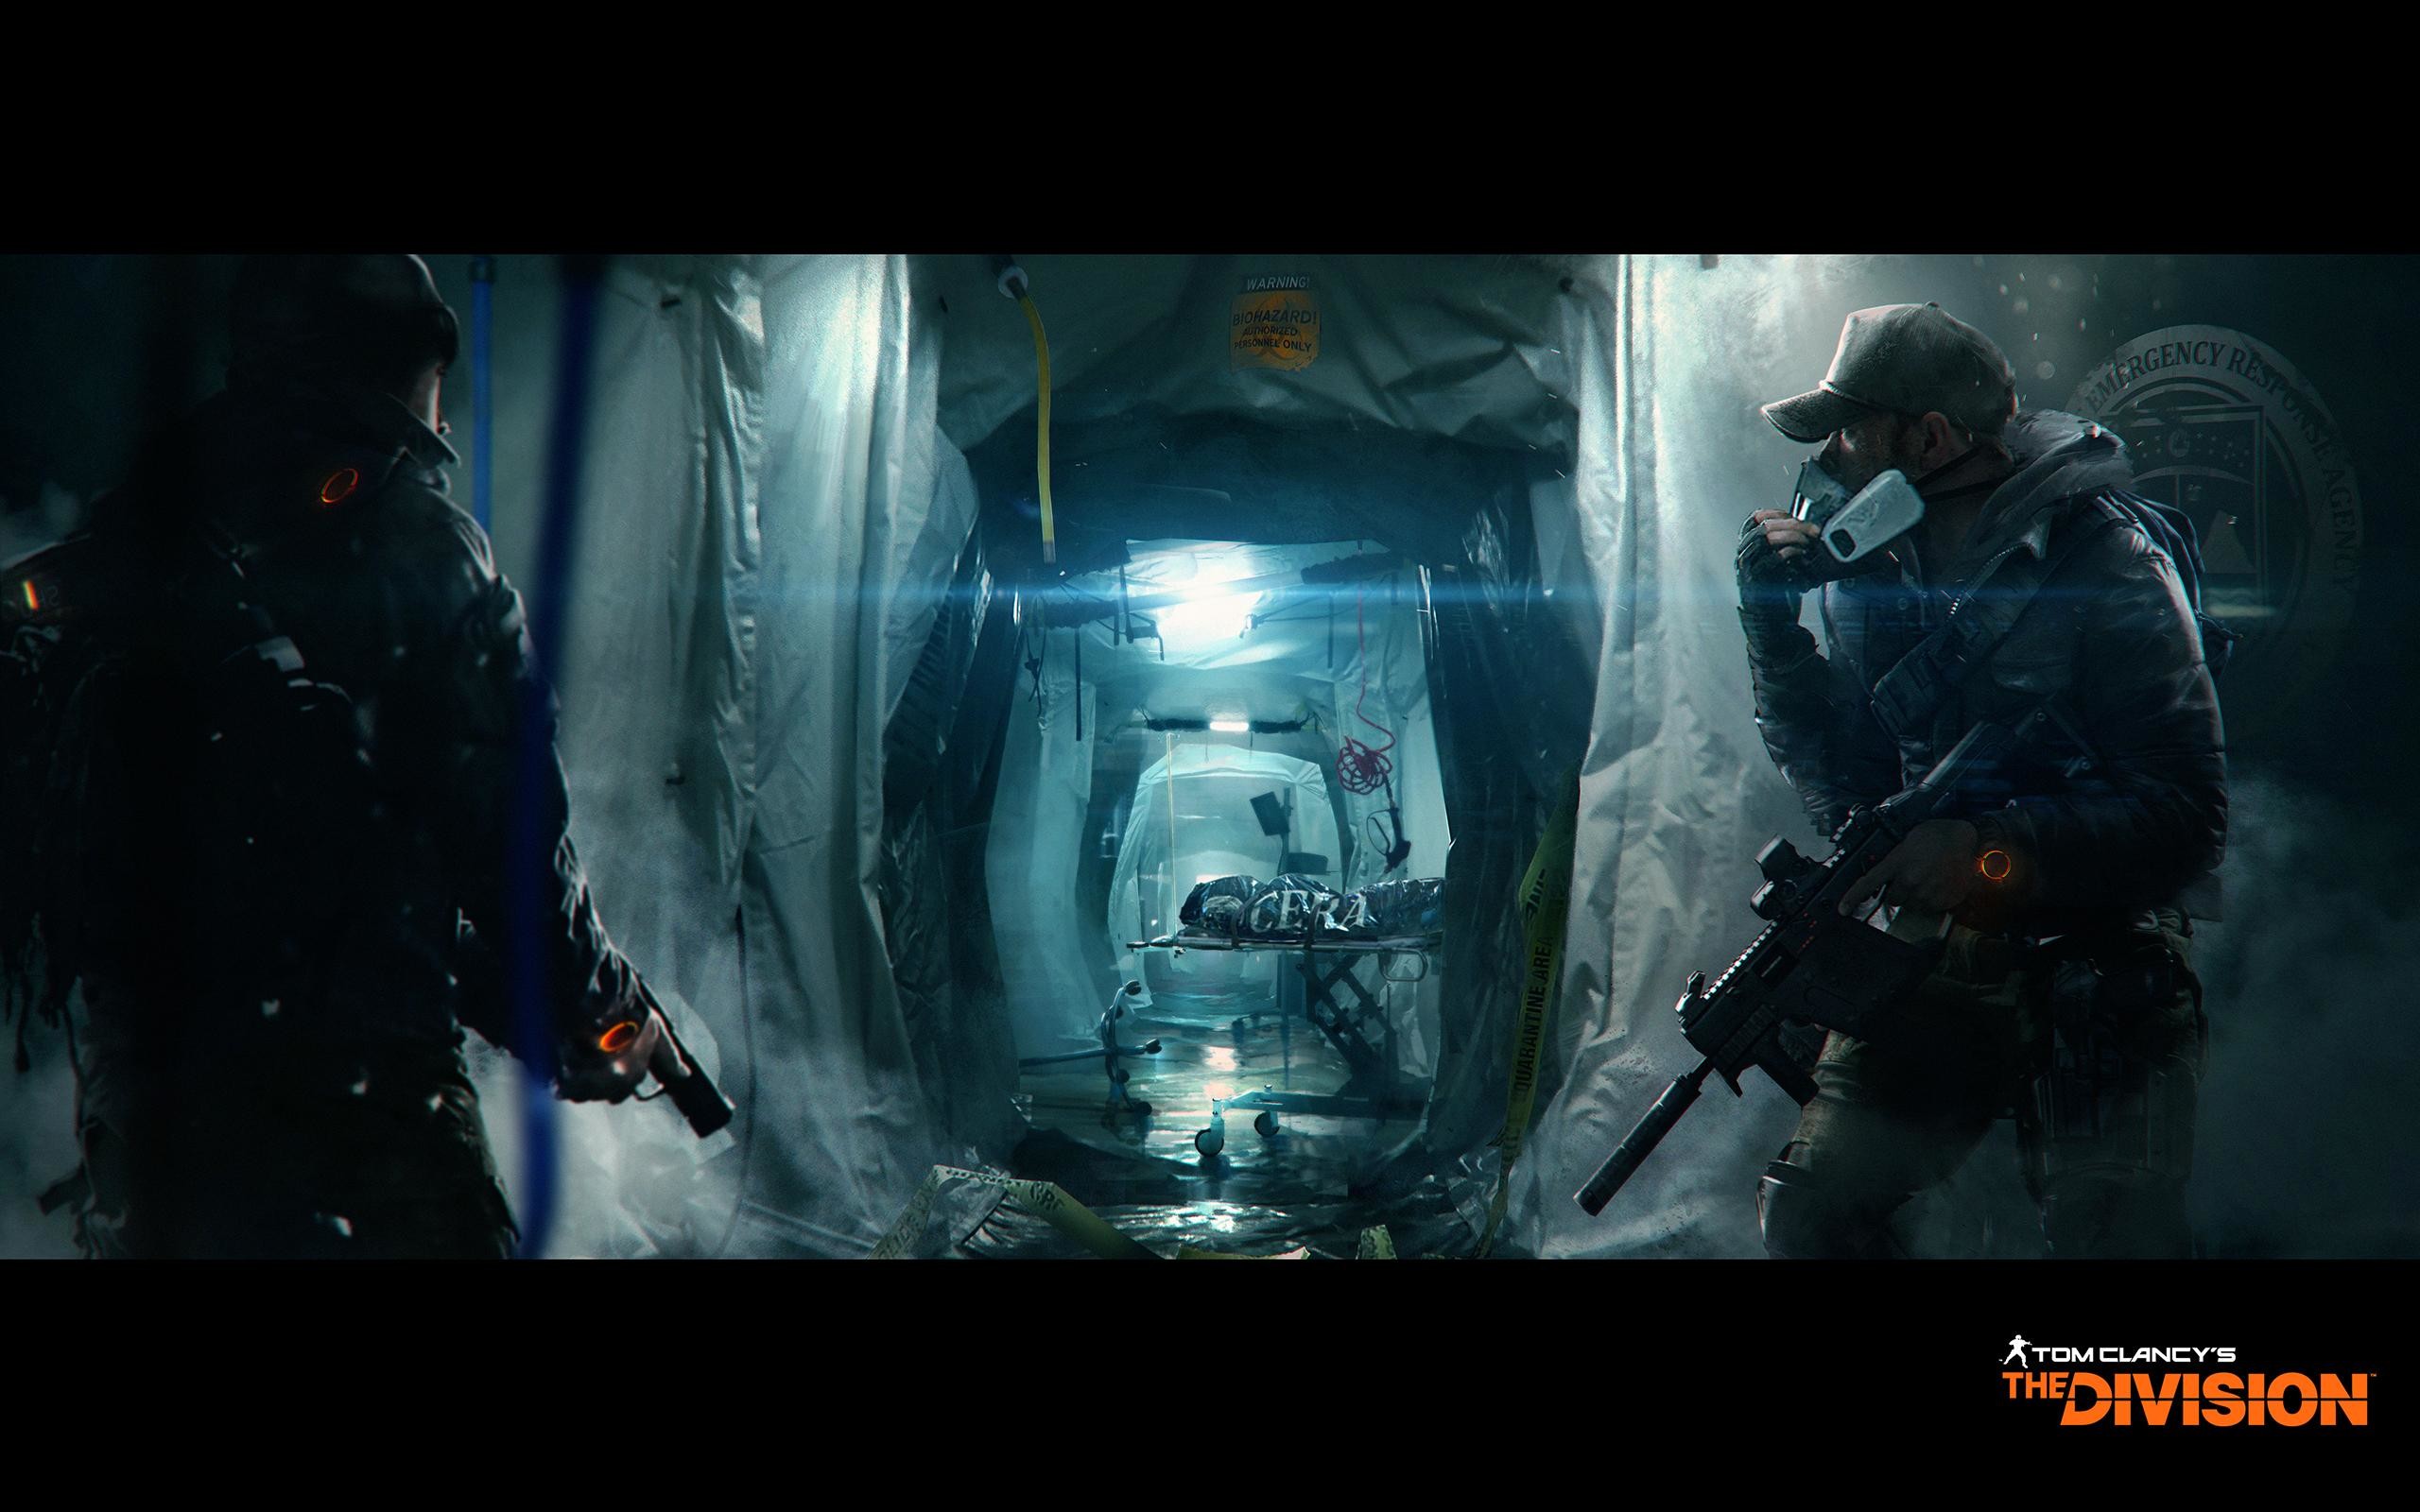 2560x1600 The Division hd wallpaper